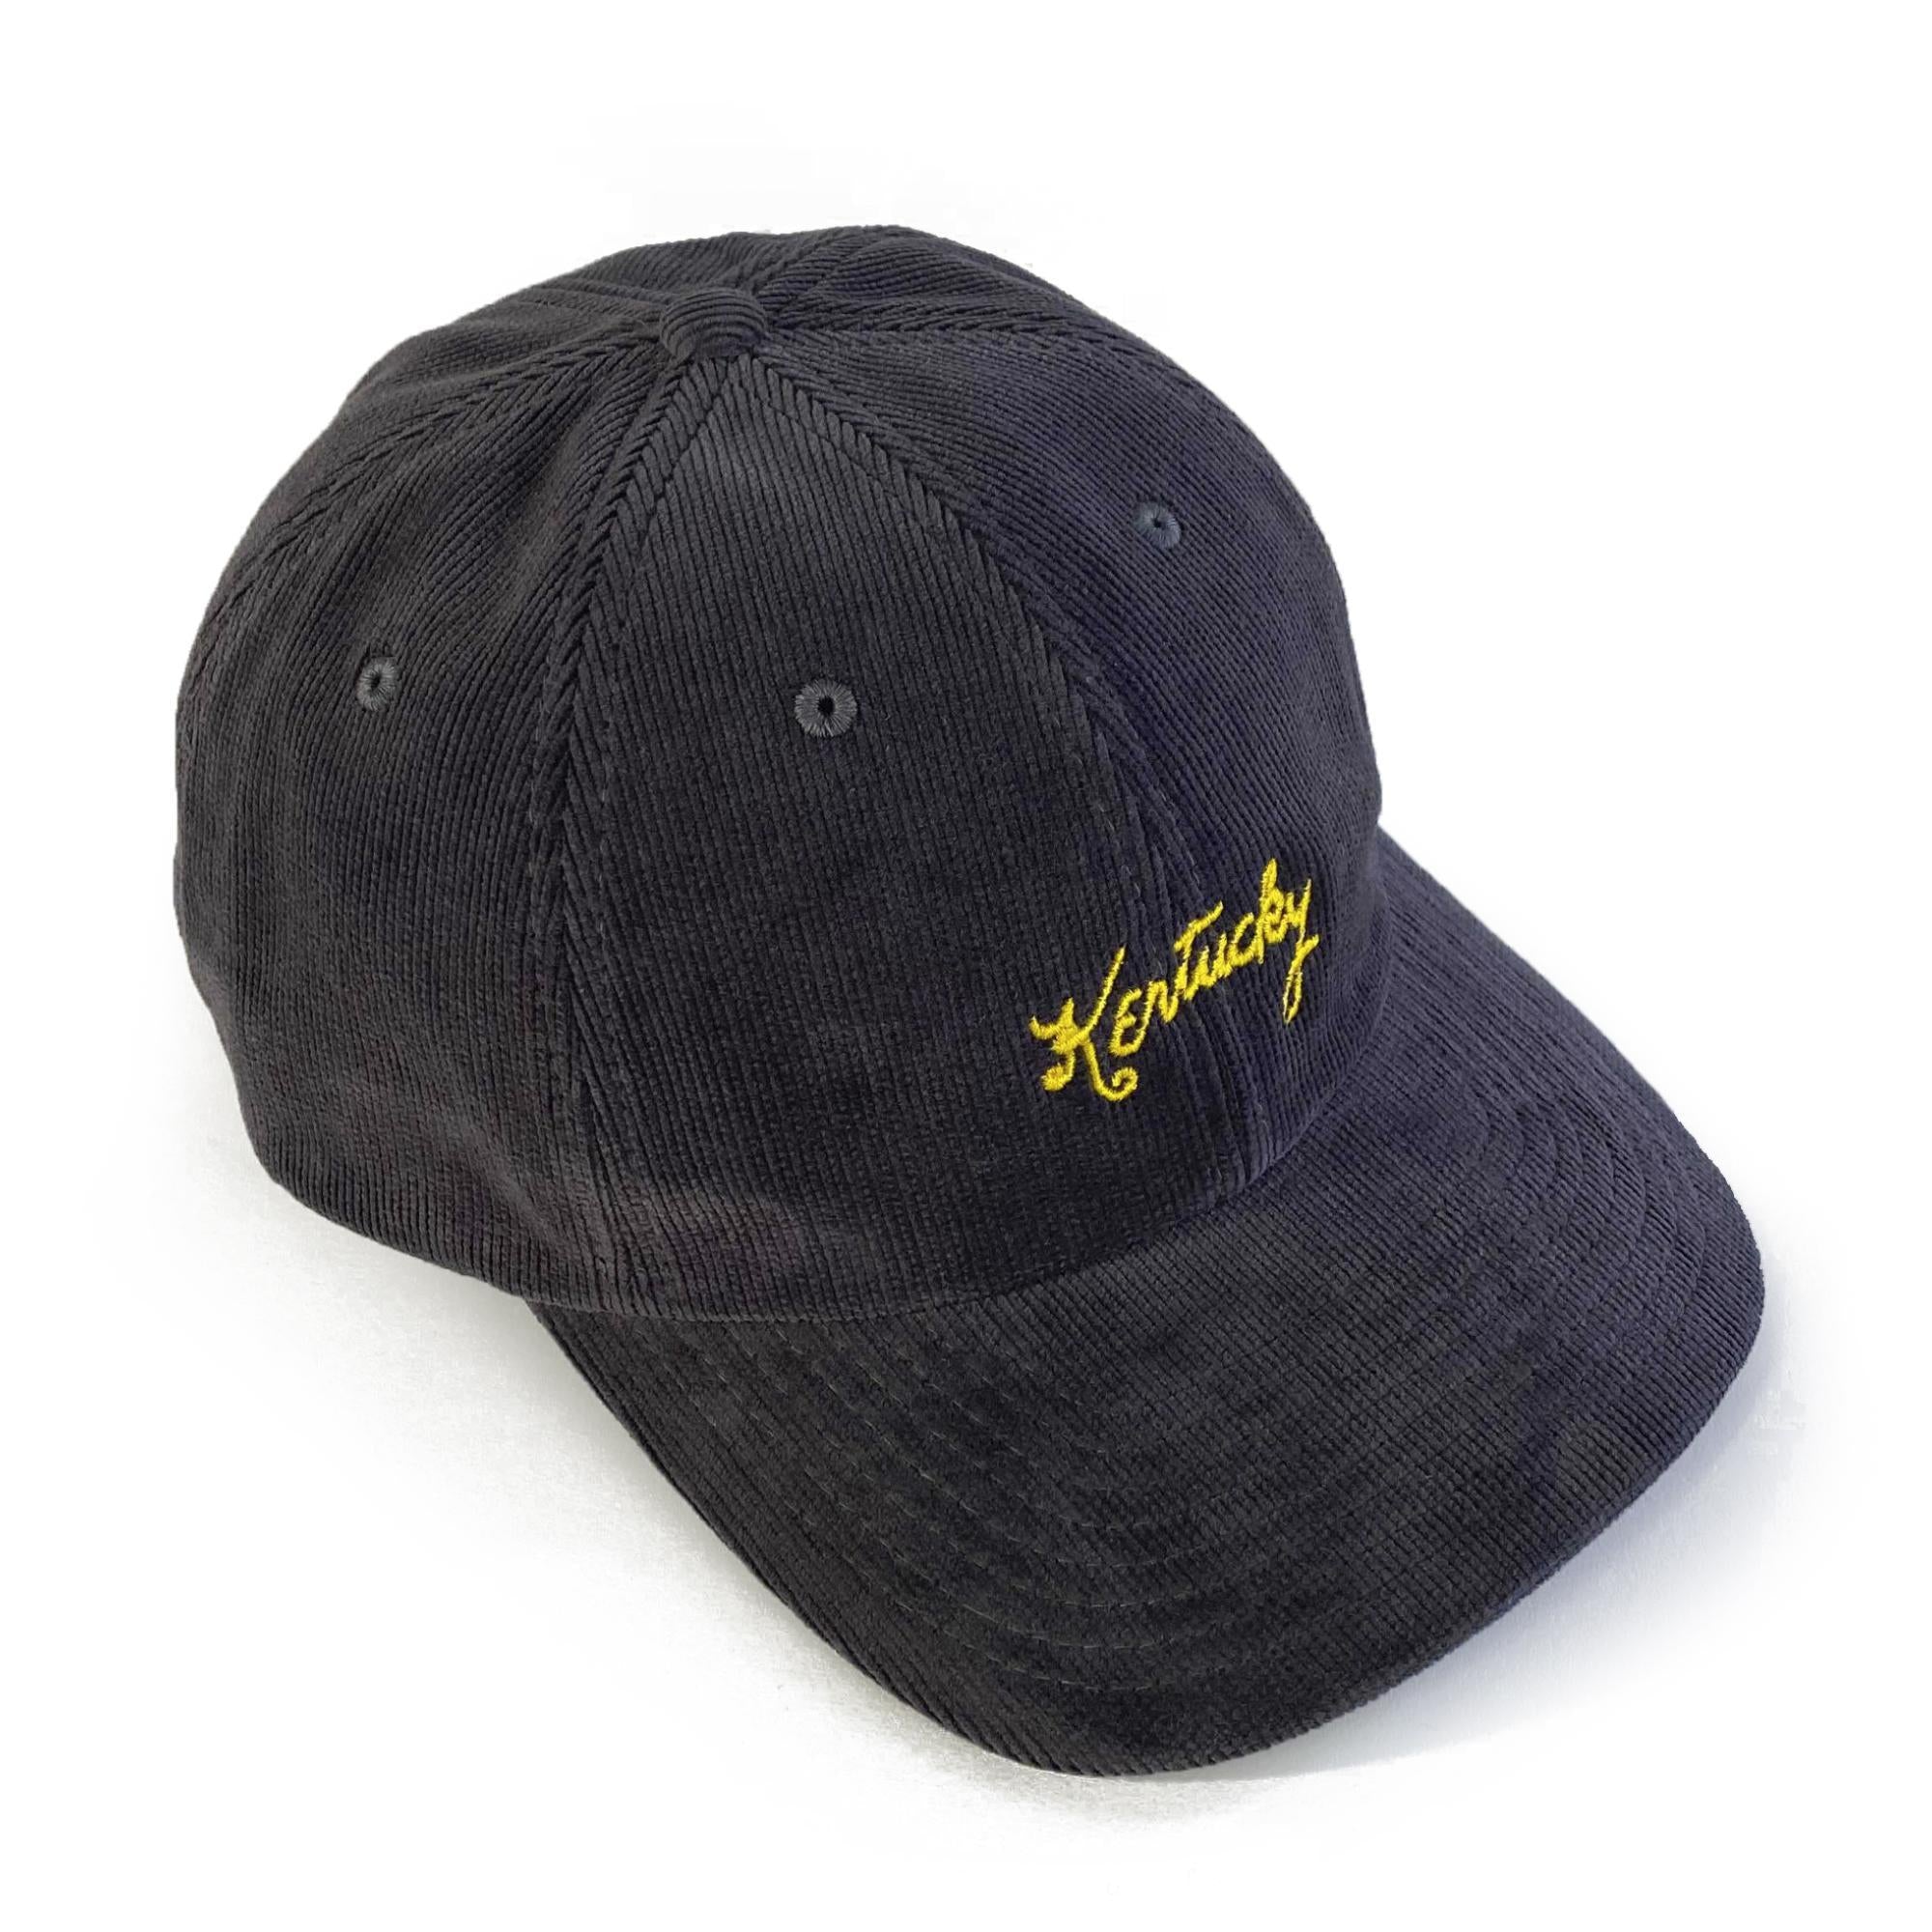 Kentucky Corduroy Dad Hat (Dark Grey)-Hat-KY for KY Store